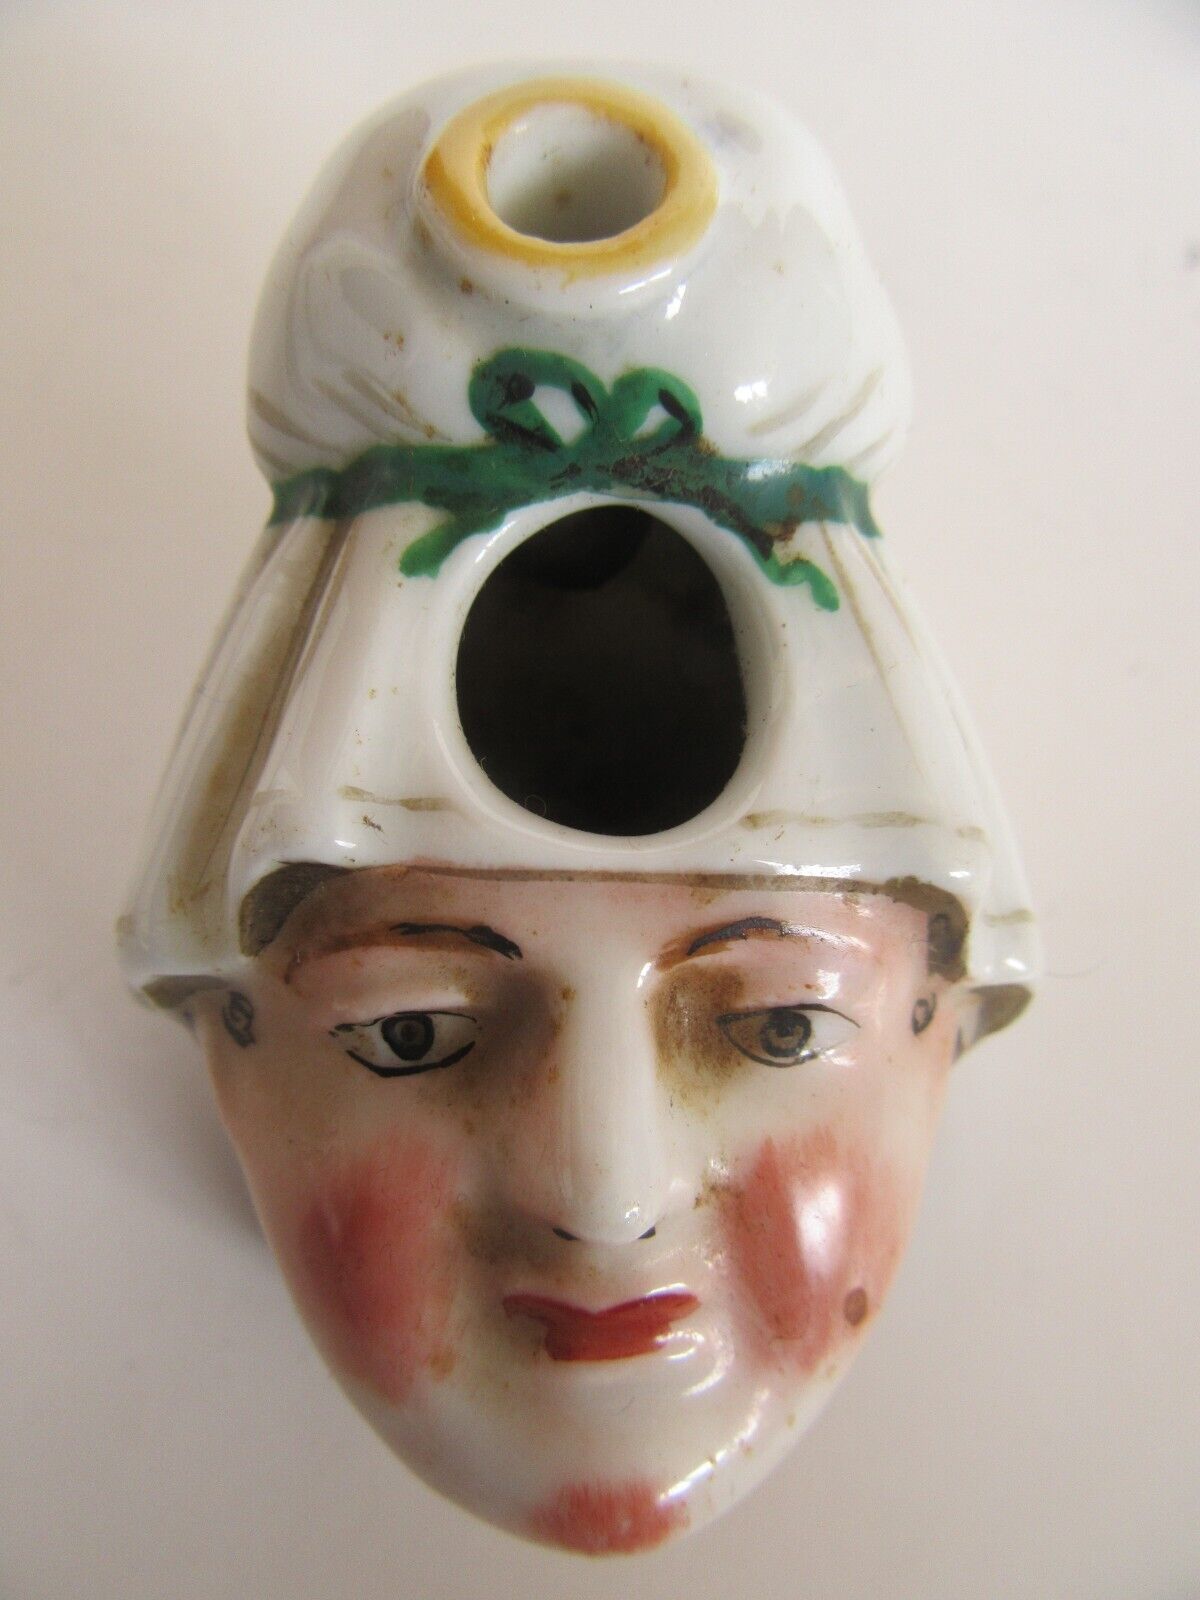 Antique 19th Century Porcelain Painted Head Whimsical Inkpot Inkwell